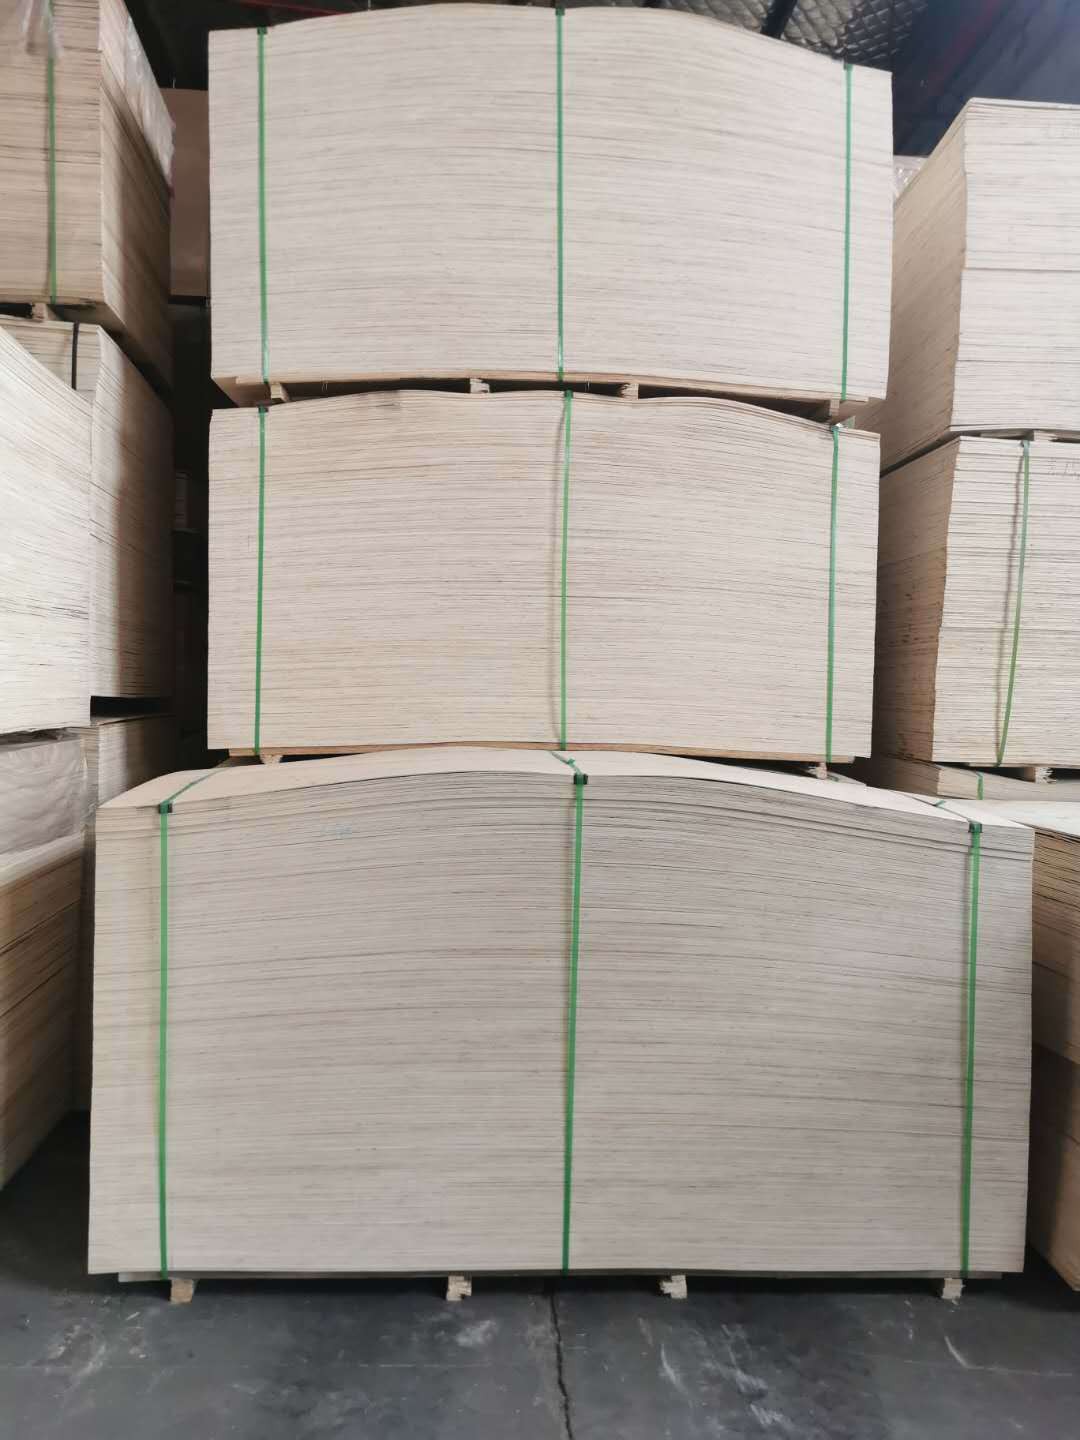 What are the advantages and disadvantages of poplar plywood?